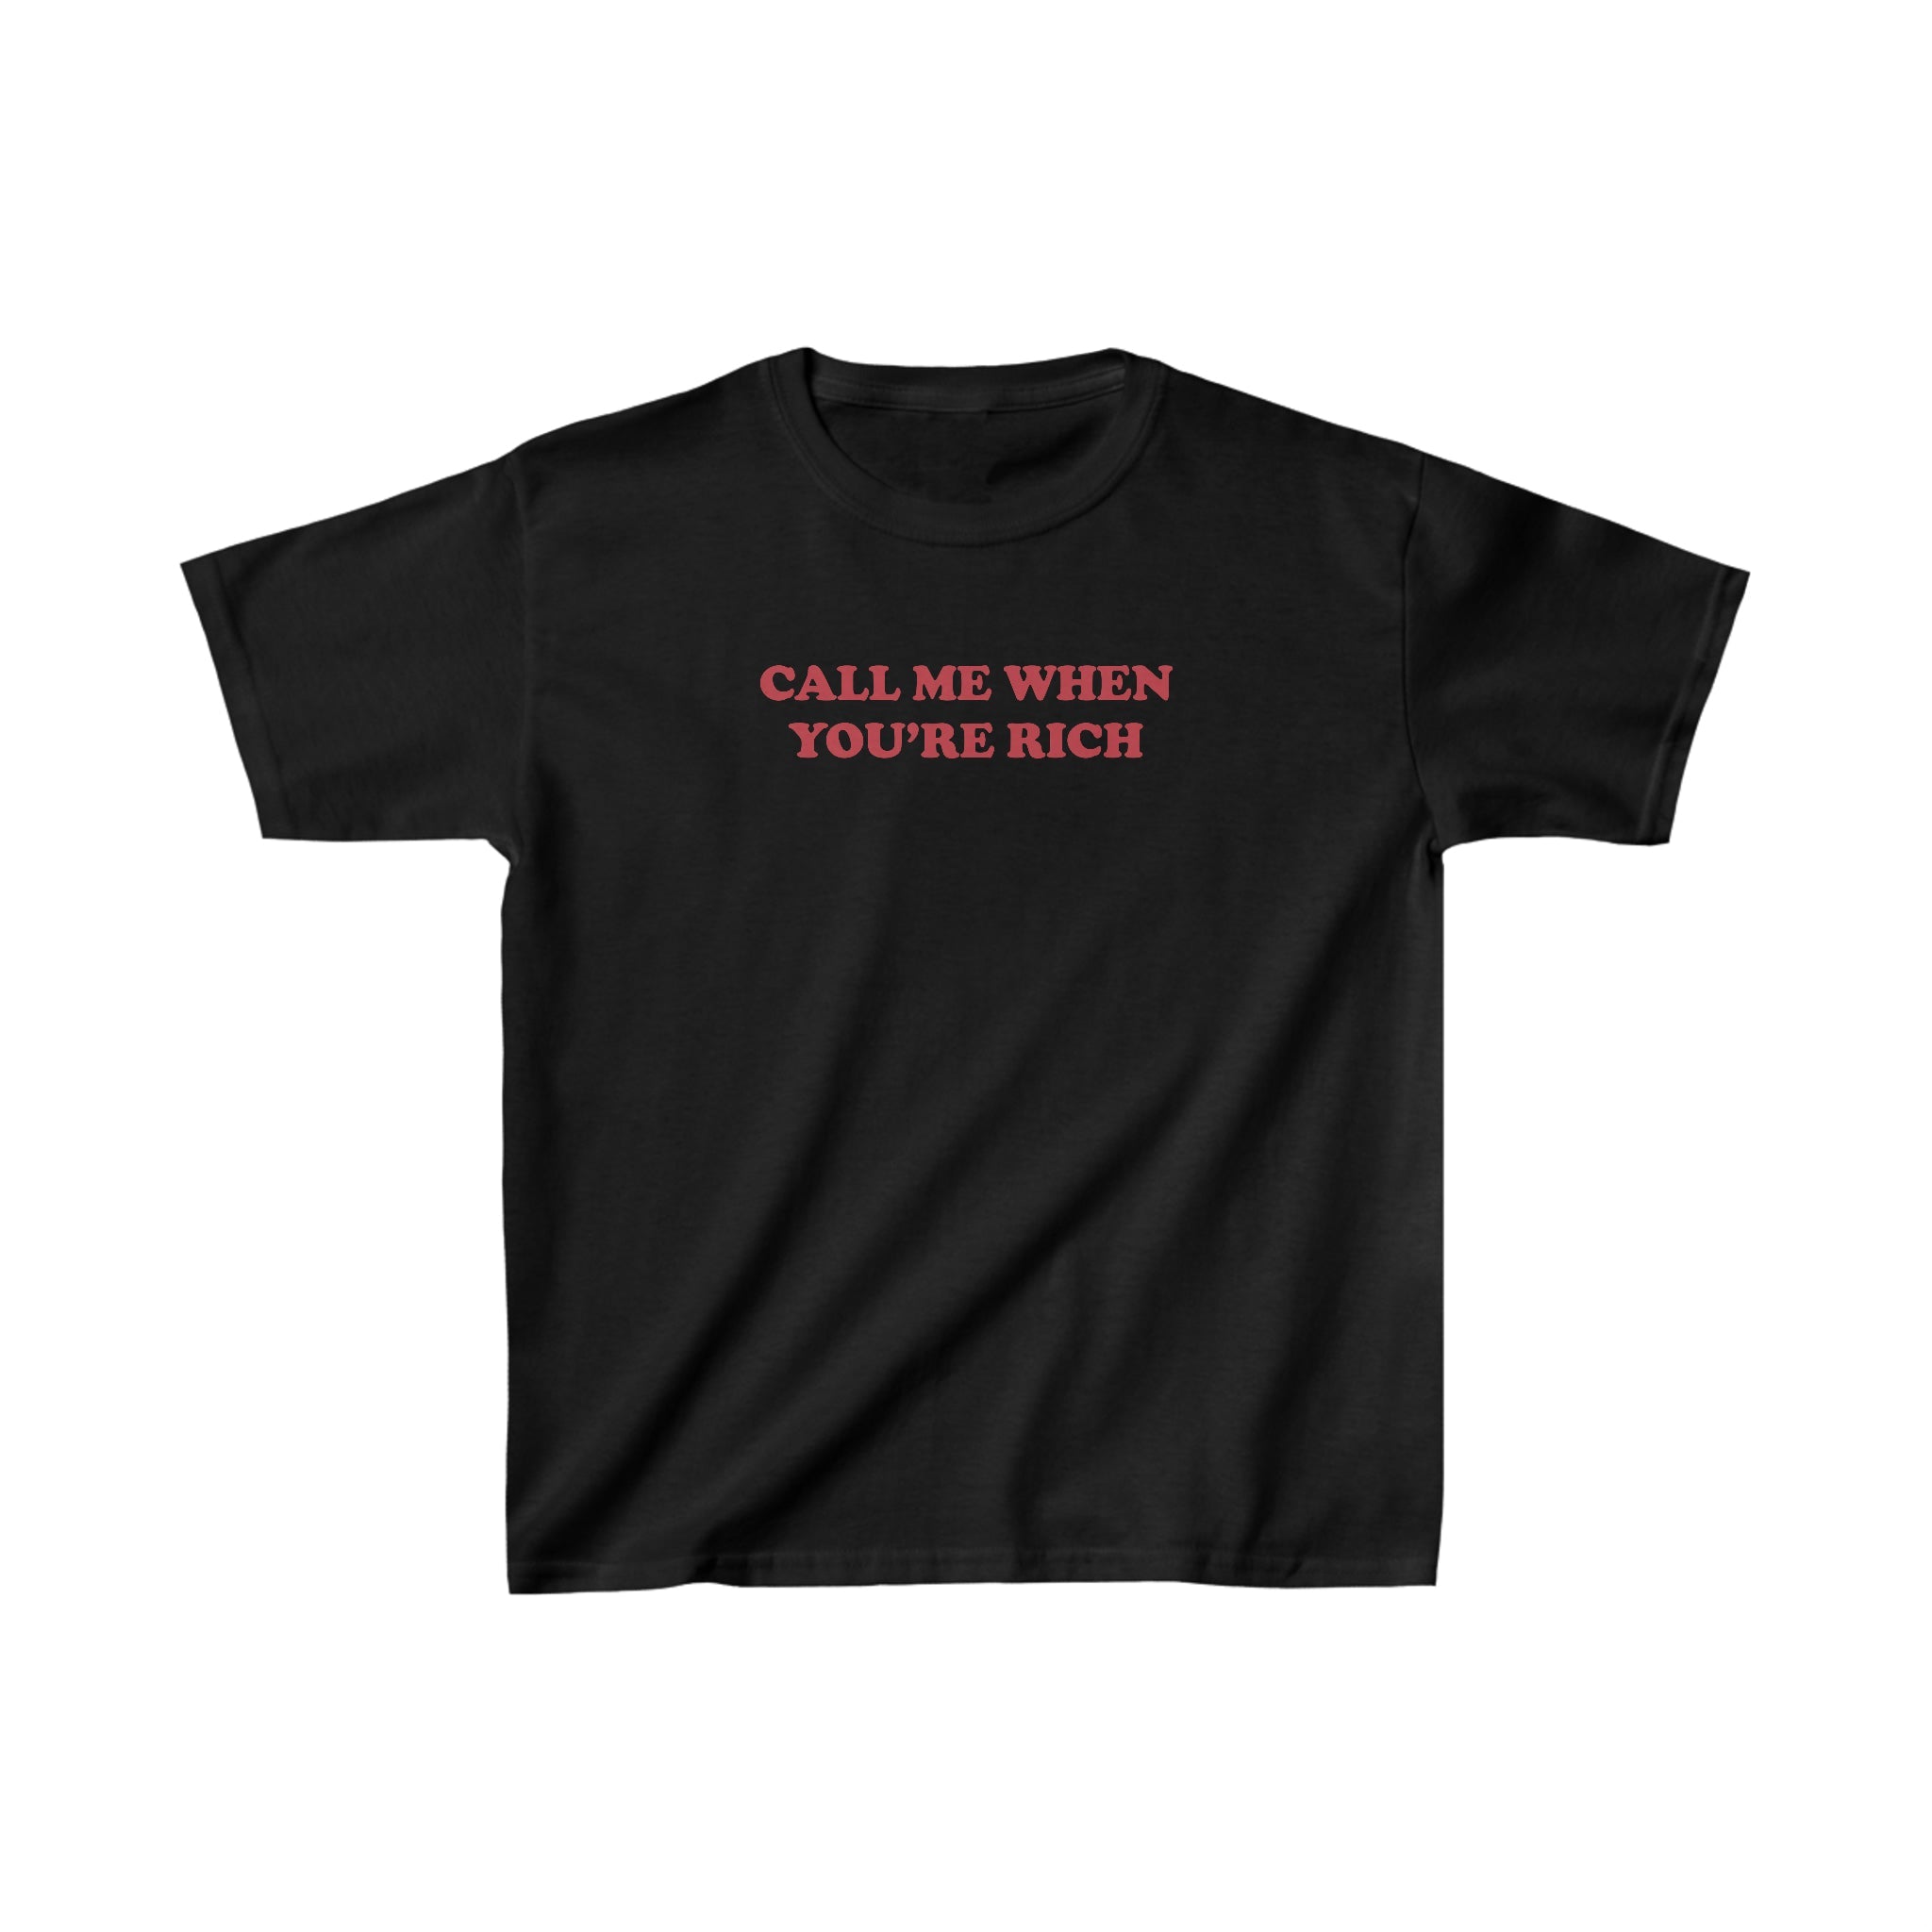 'Call Me When You're Rich' baby tee - In Print We Trust